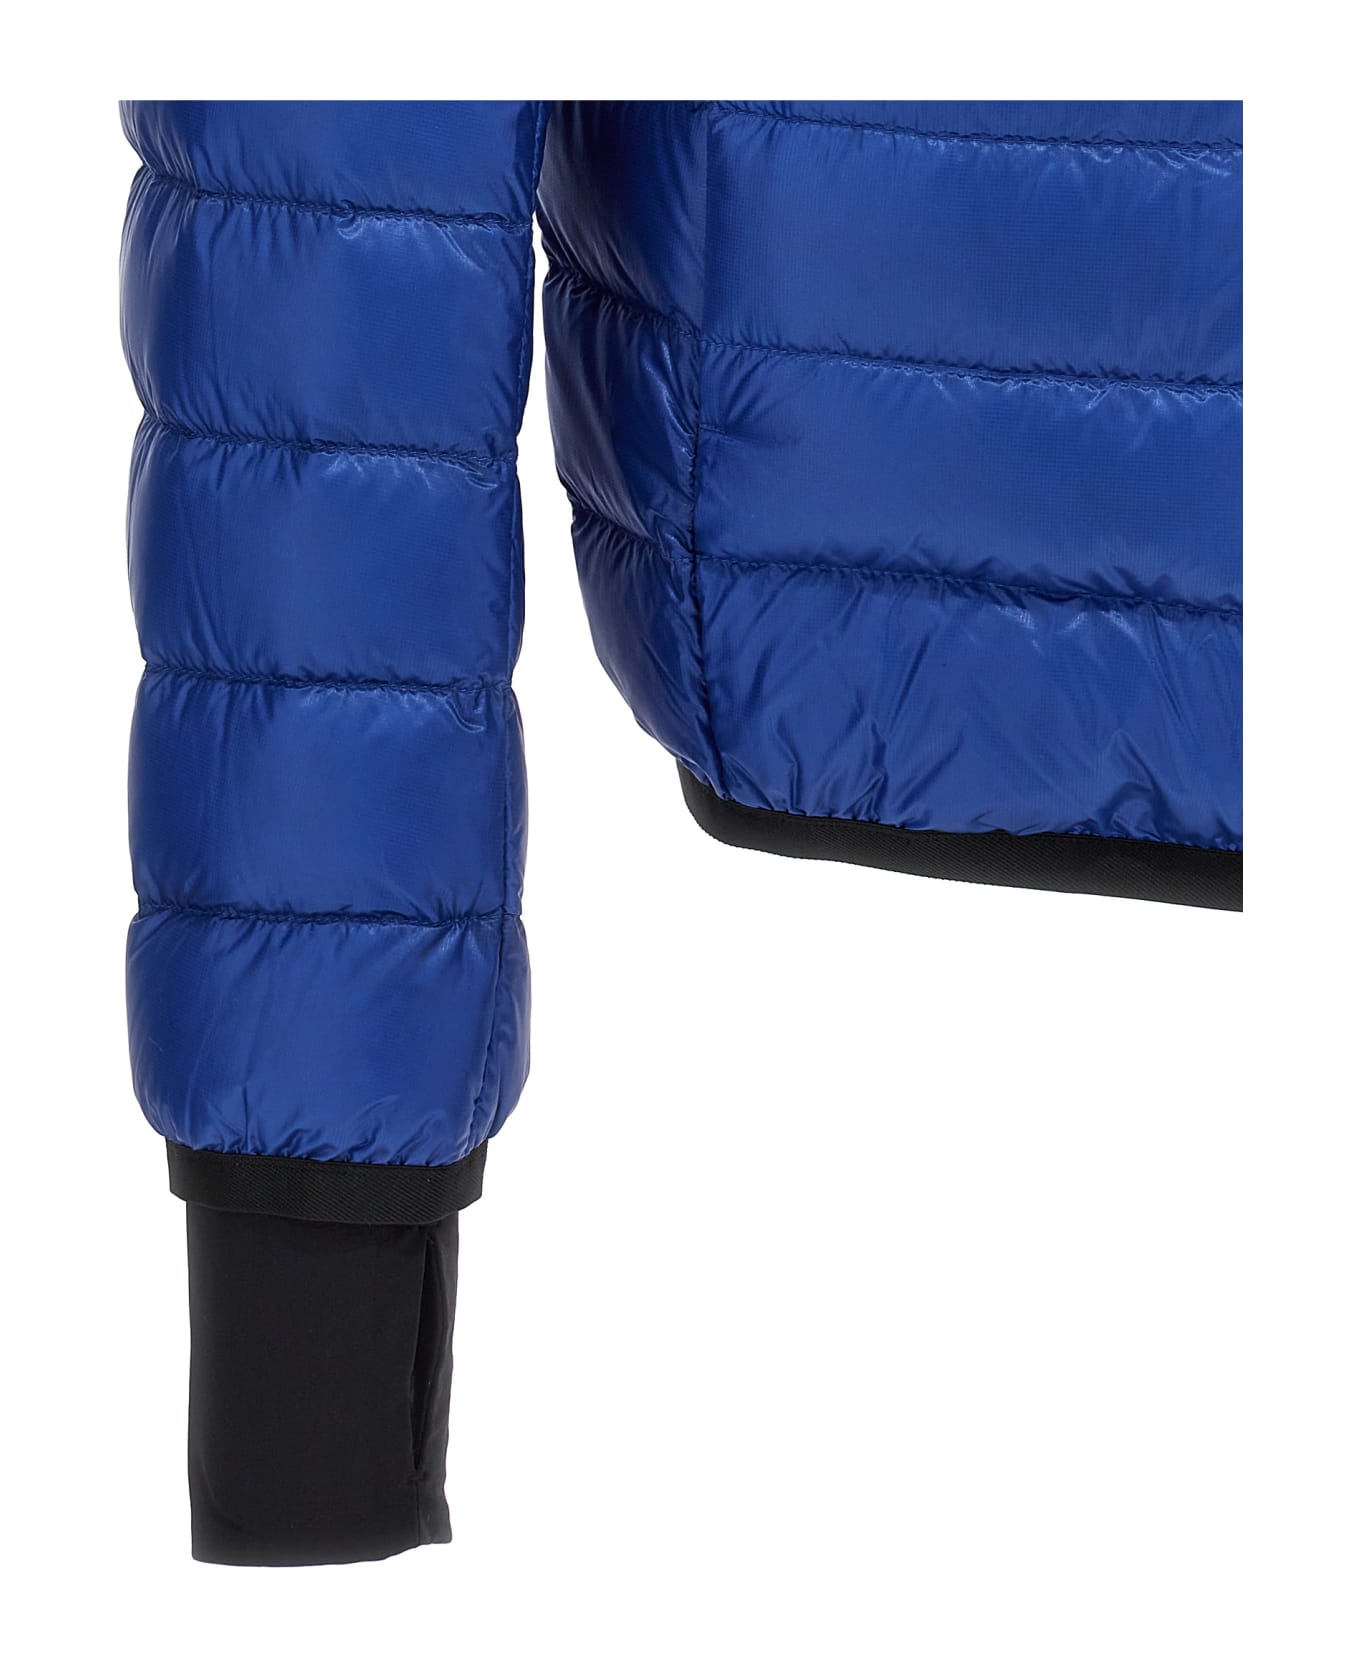 Moncler Grenoble 'hers' Down Jacket - Blue